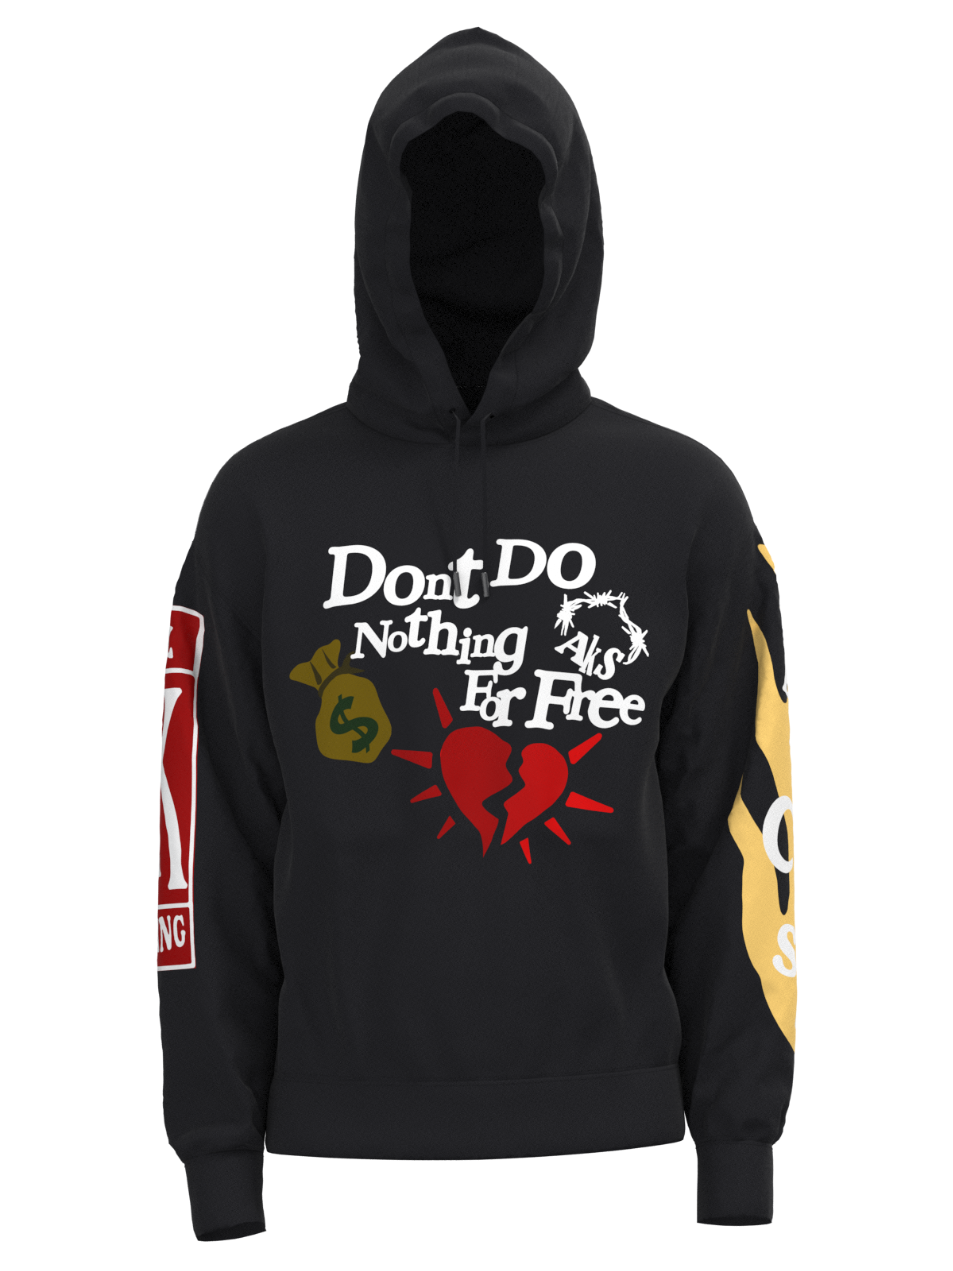 DON'T DO NOTHING FOR FREE HOODIE (BLACK)